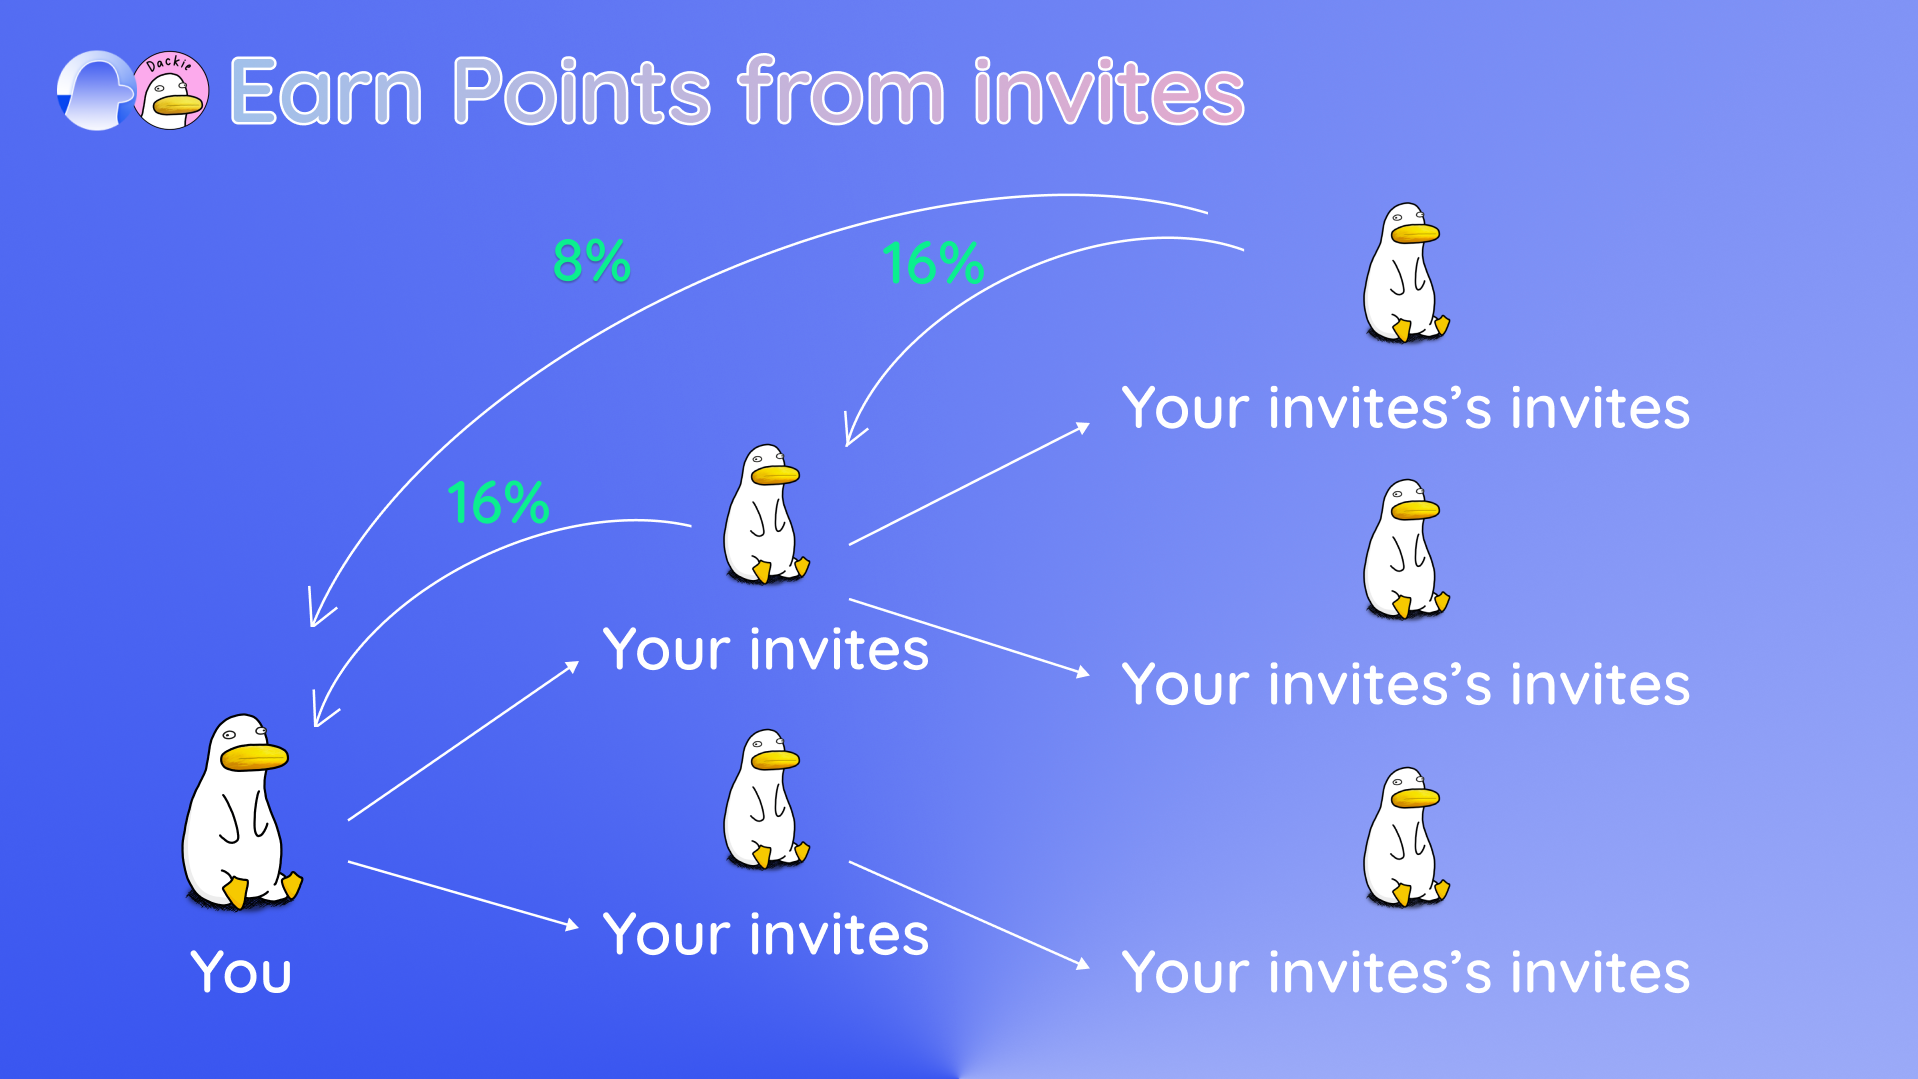 Earn Points from Invites